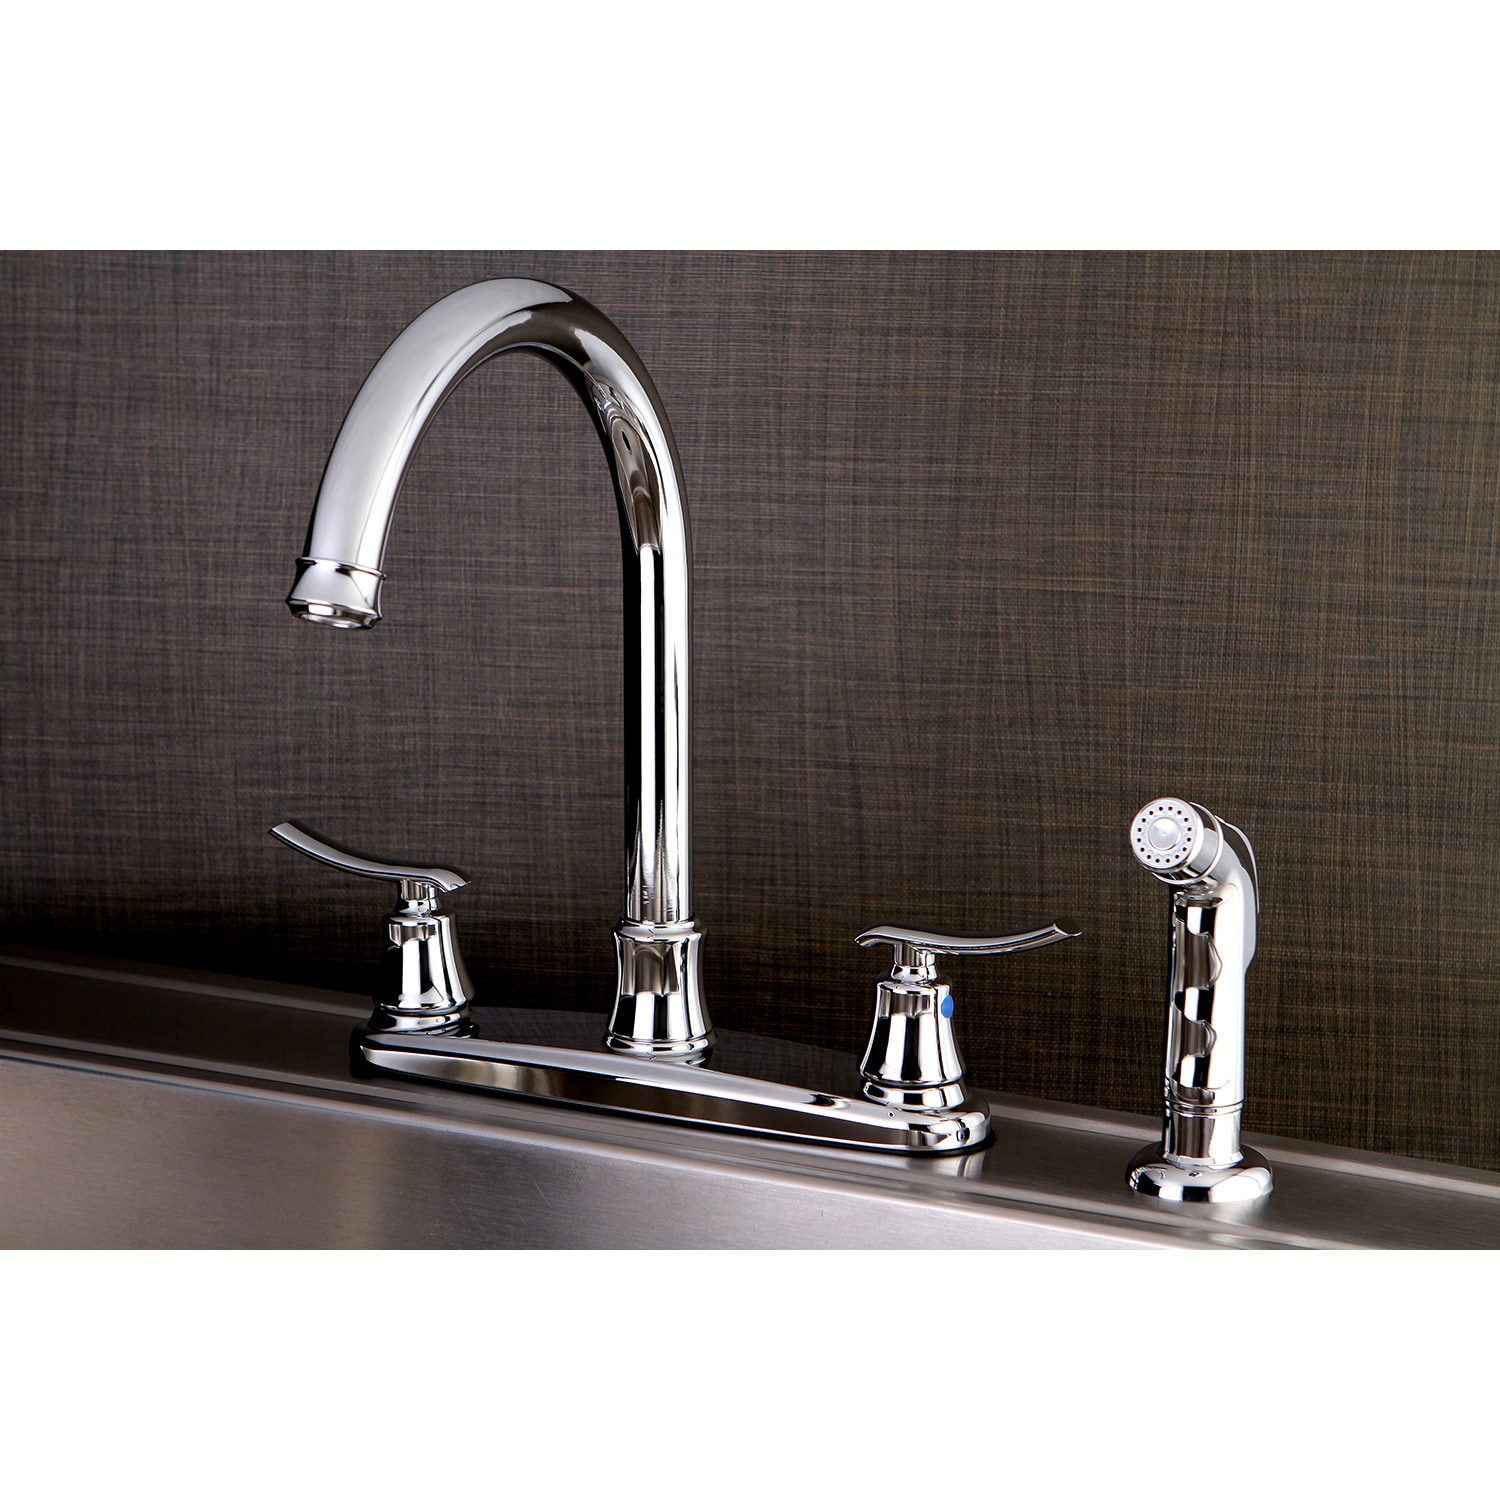 Euro Chrome Kitchen Faucet With Side Sprayer Overstock 10329539